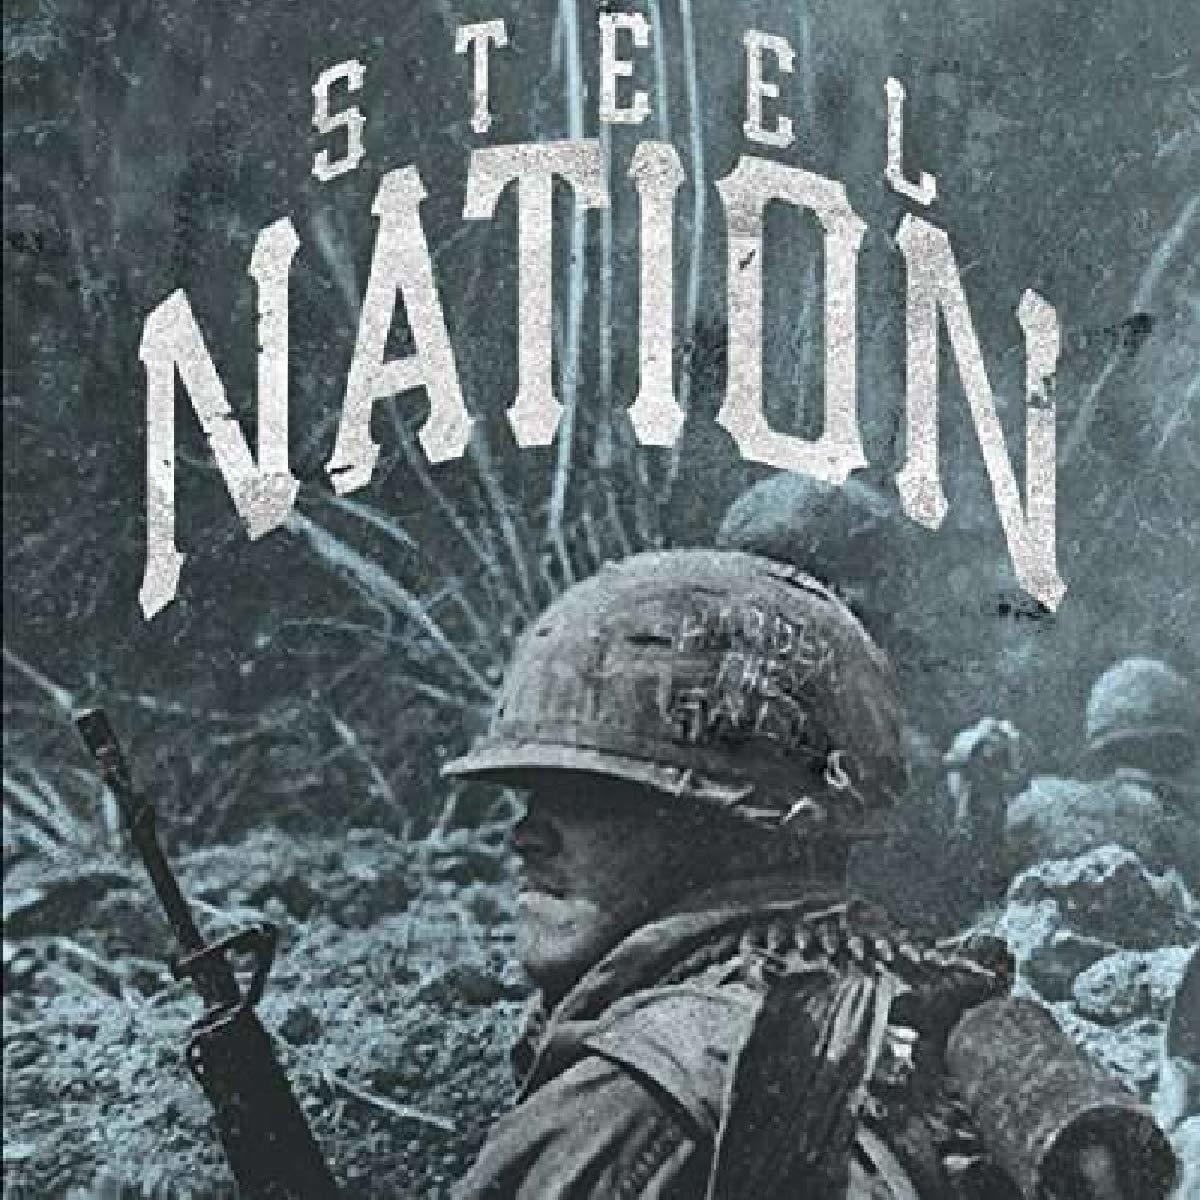 Steel Nation - They Fall Harder (Vinyl) - The